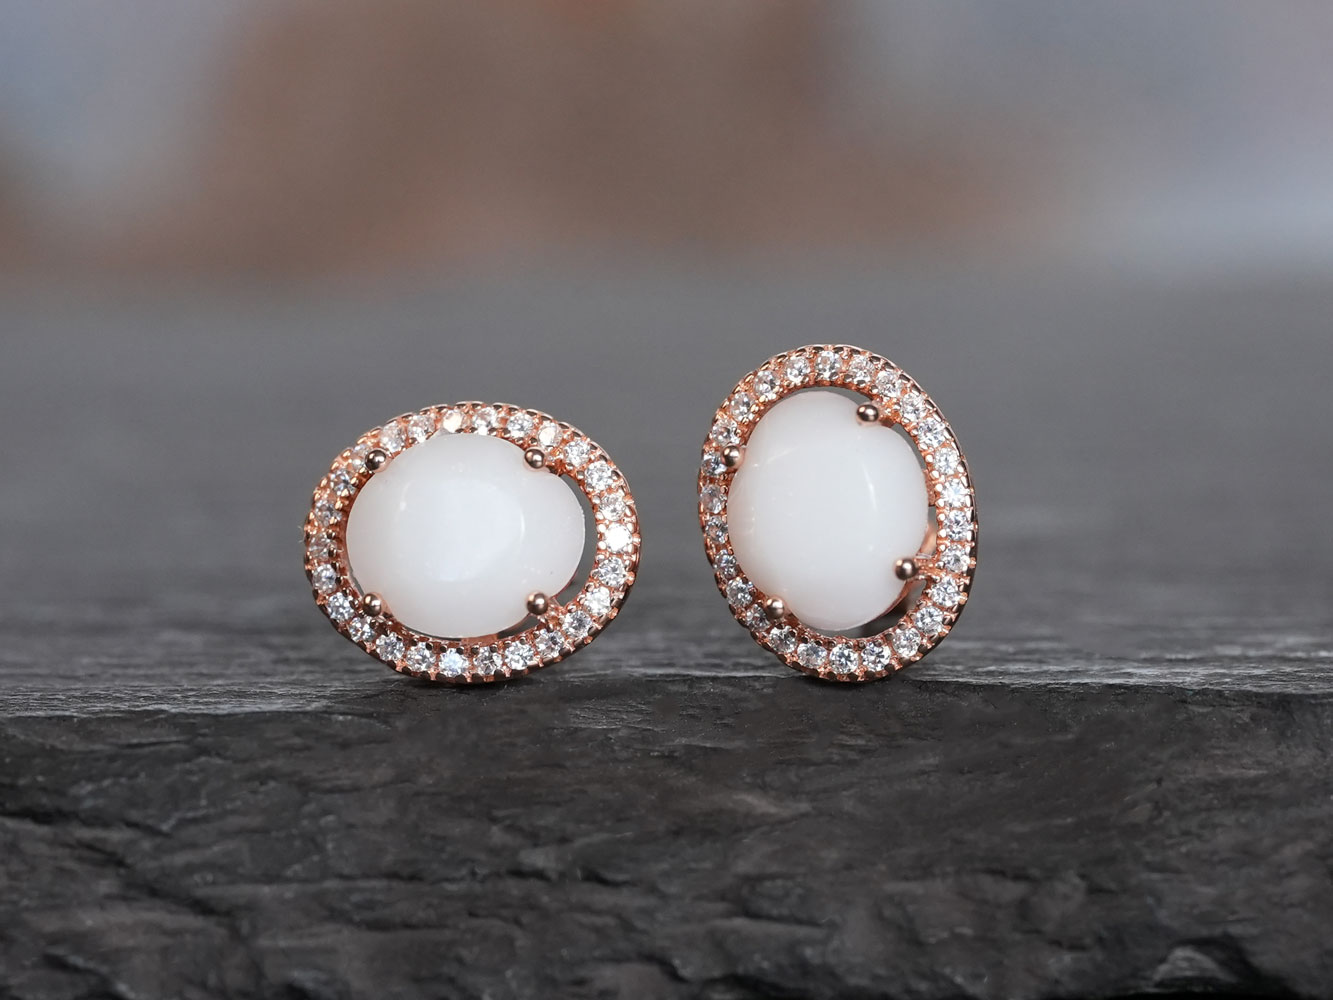 breastmilk jewelry earrings studded oval with sterling silver rose gold plated rim with crystals from KeepsakeMom faceted oval breastmilk stone